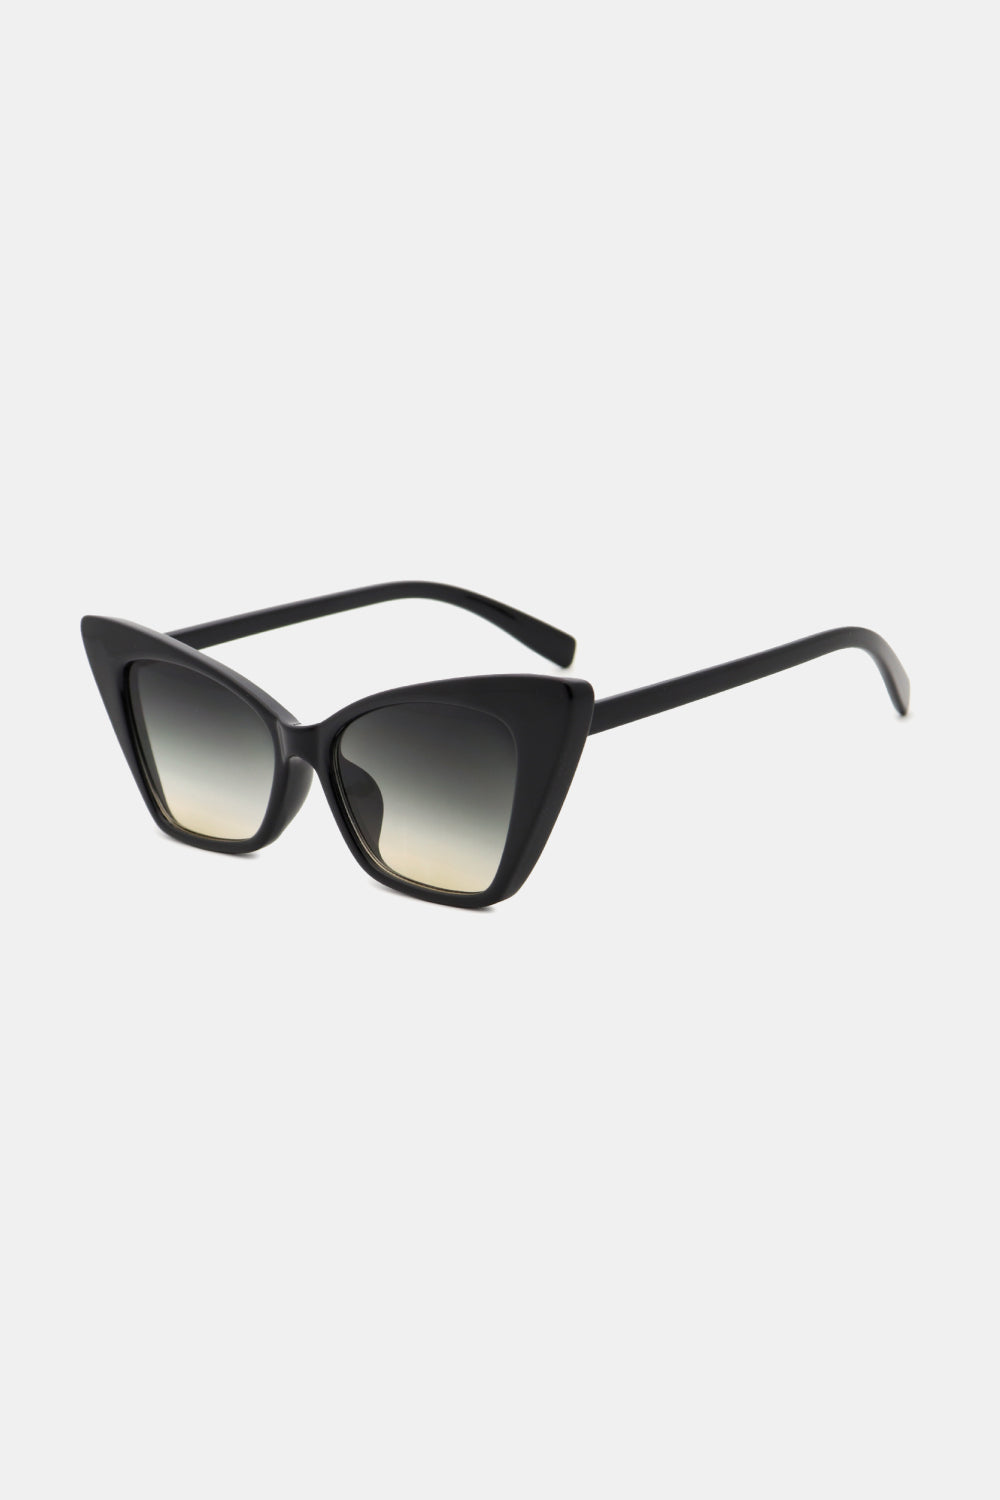 Acetate Lens Cat Eye Sunglasses Print on any thing USA/STOD clothes